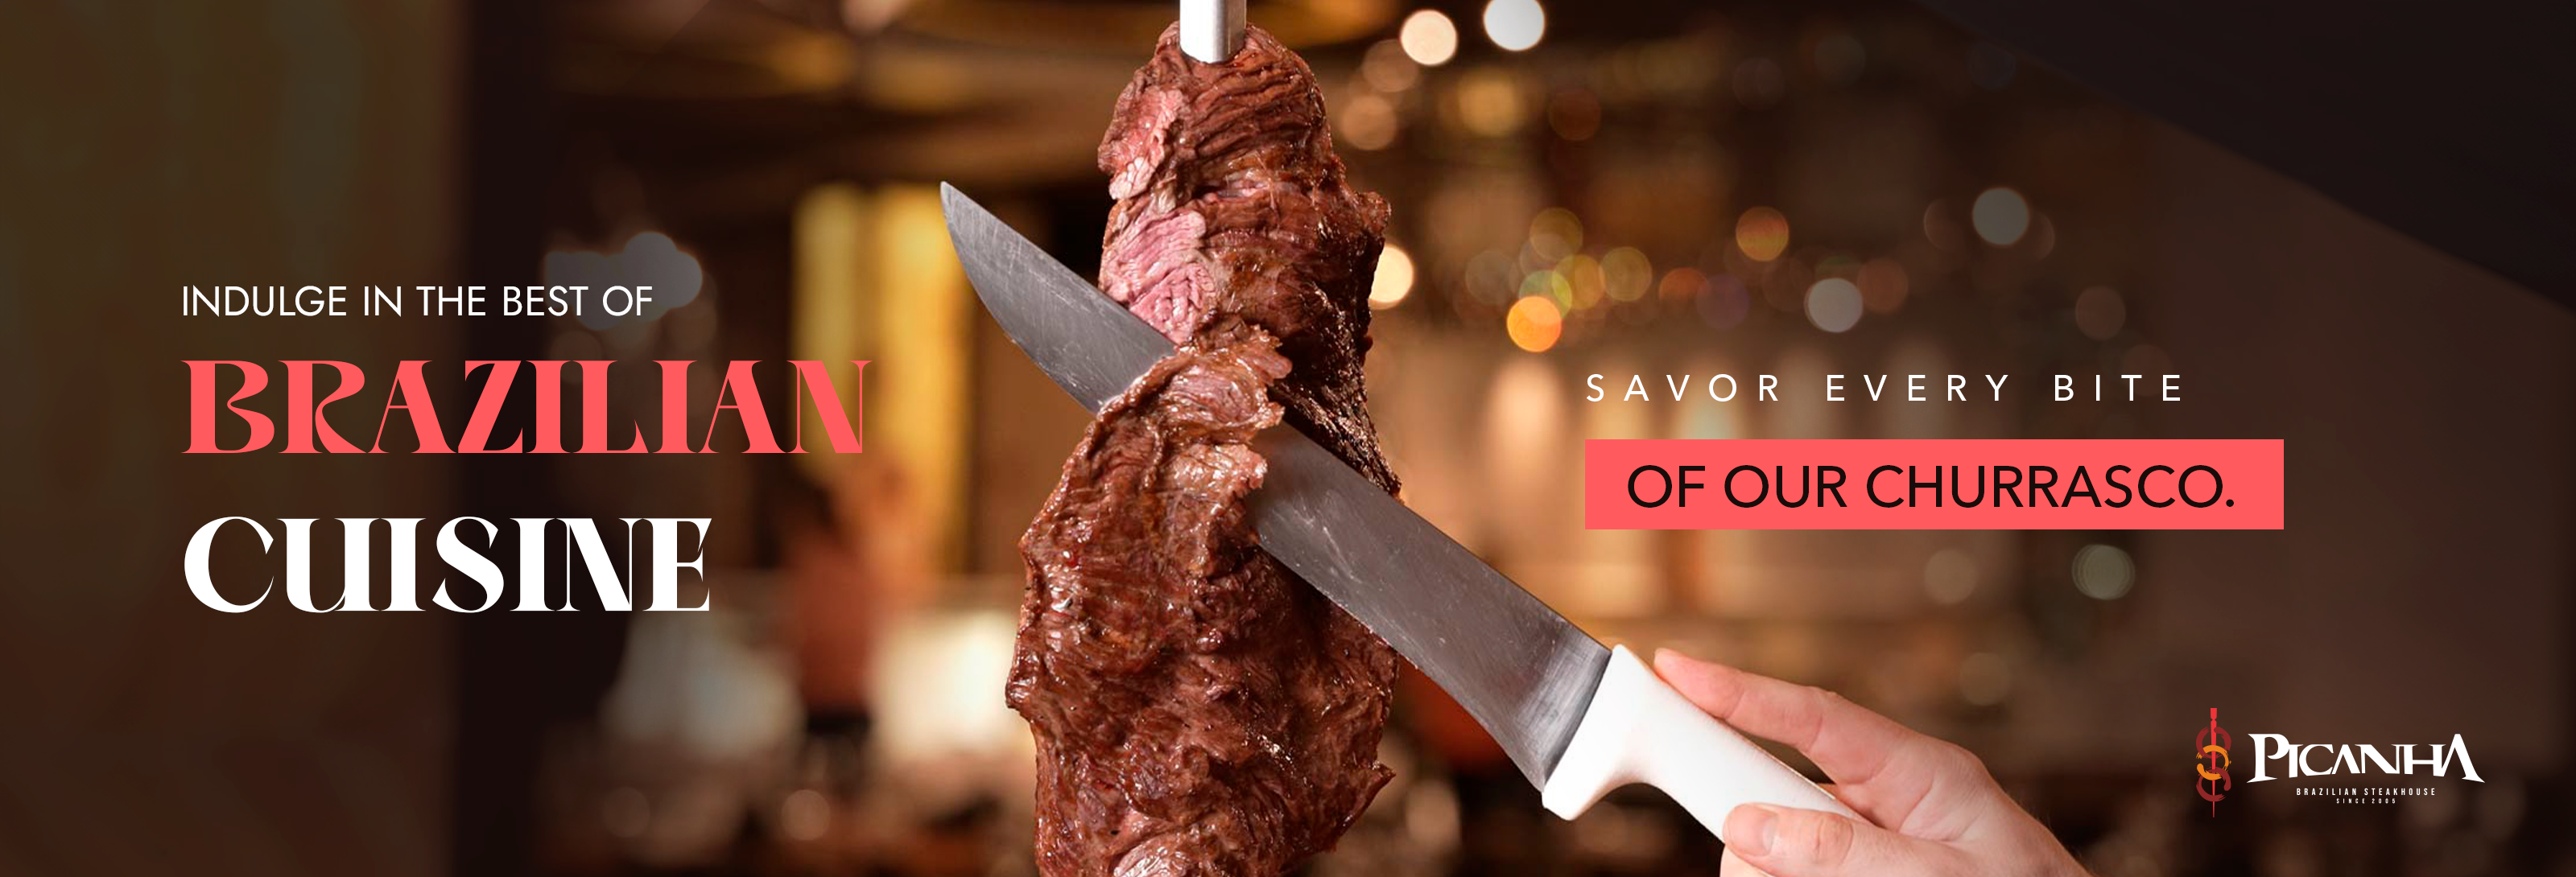 Picanha Ads 3 Website Banner Advertising